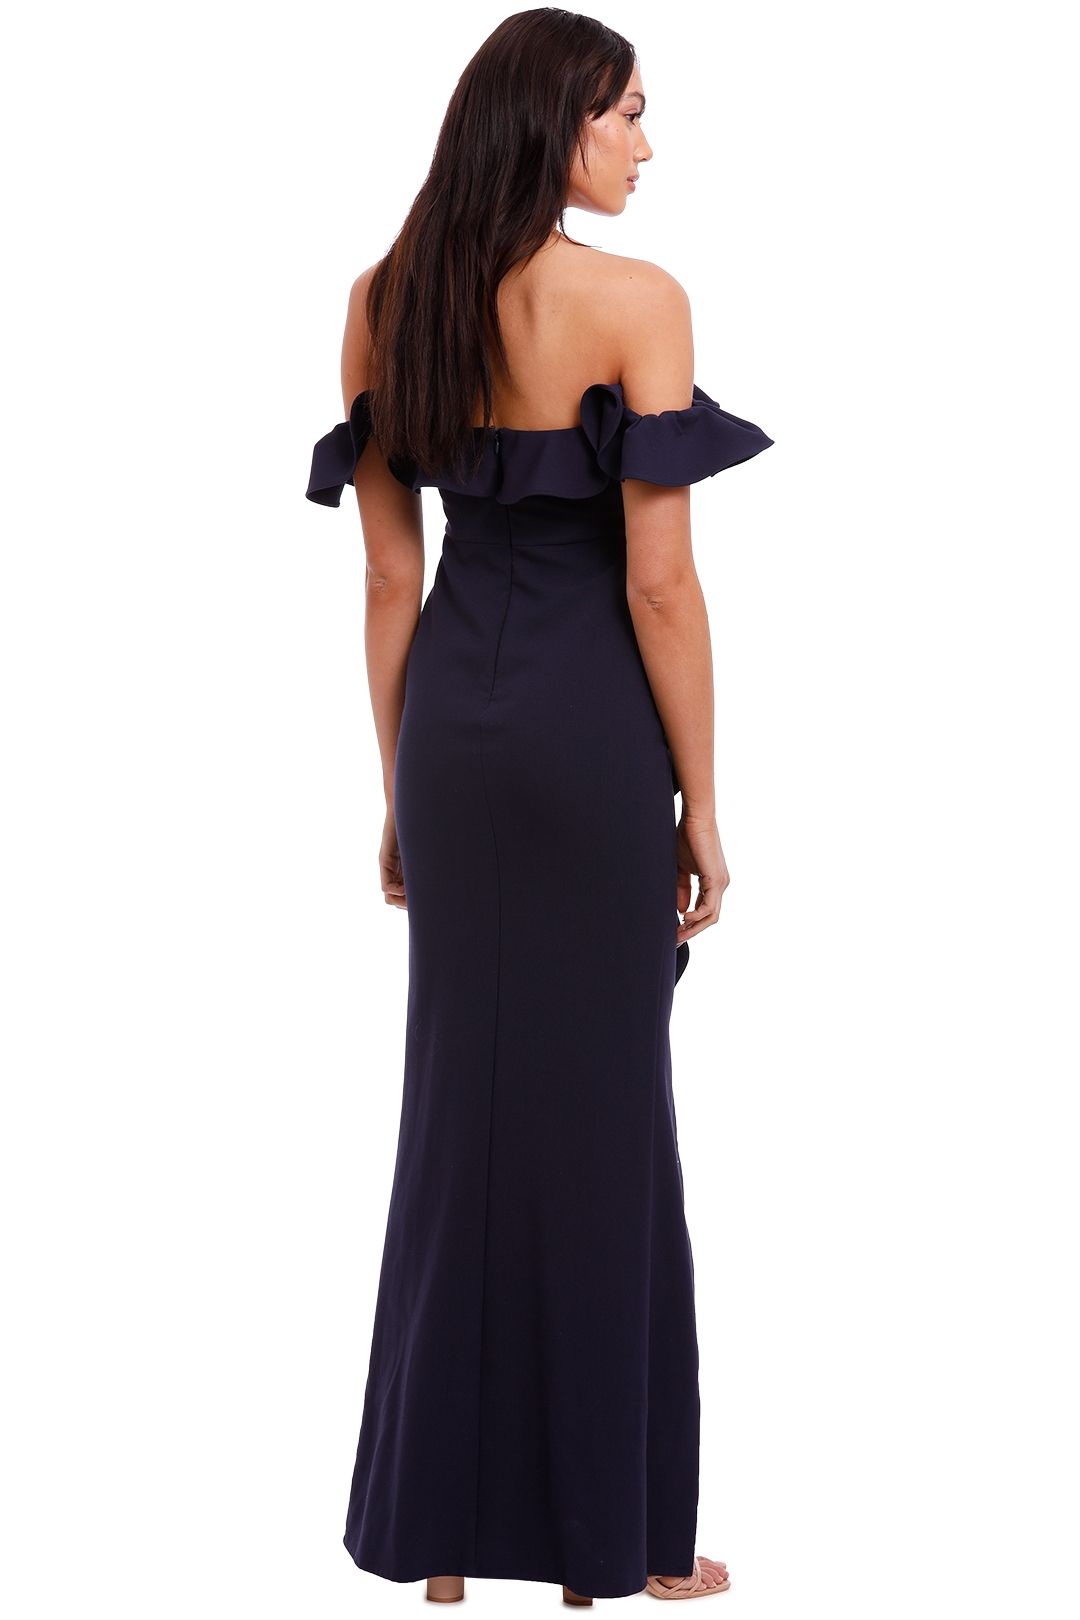 Miller Gown in Navy by Likely NYC for Hire | GlamCorner